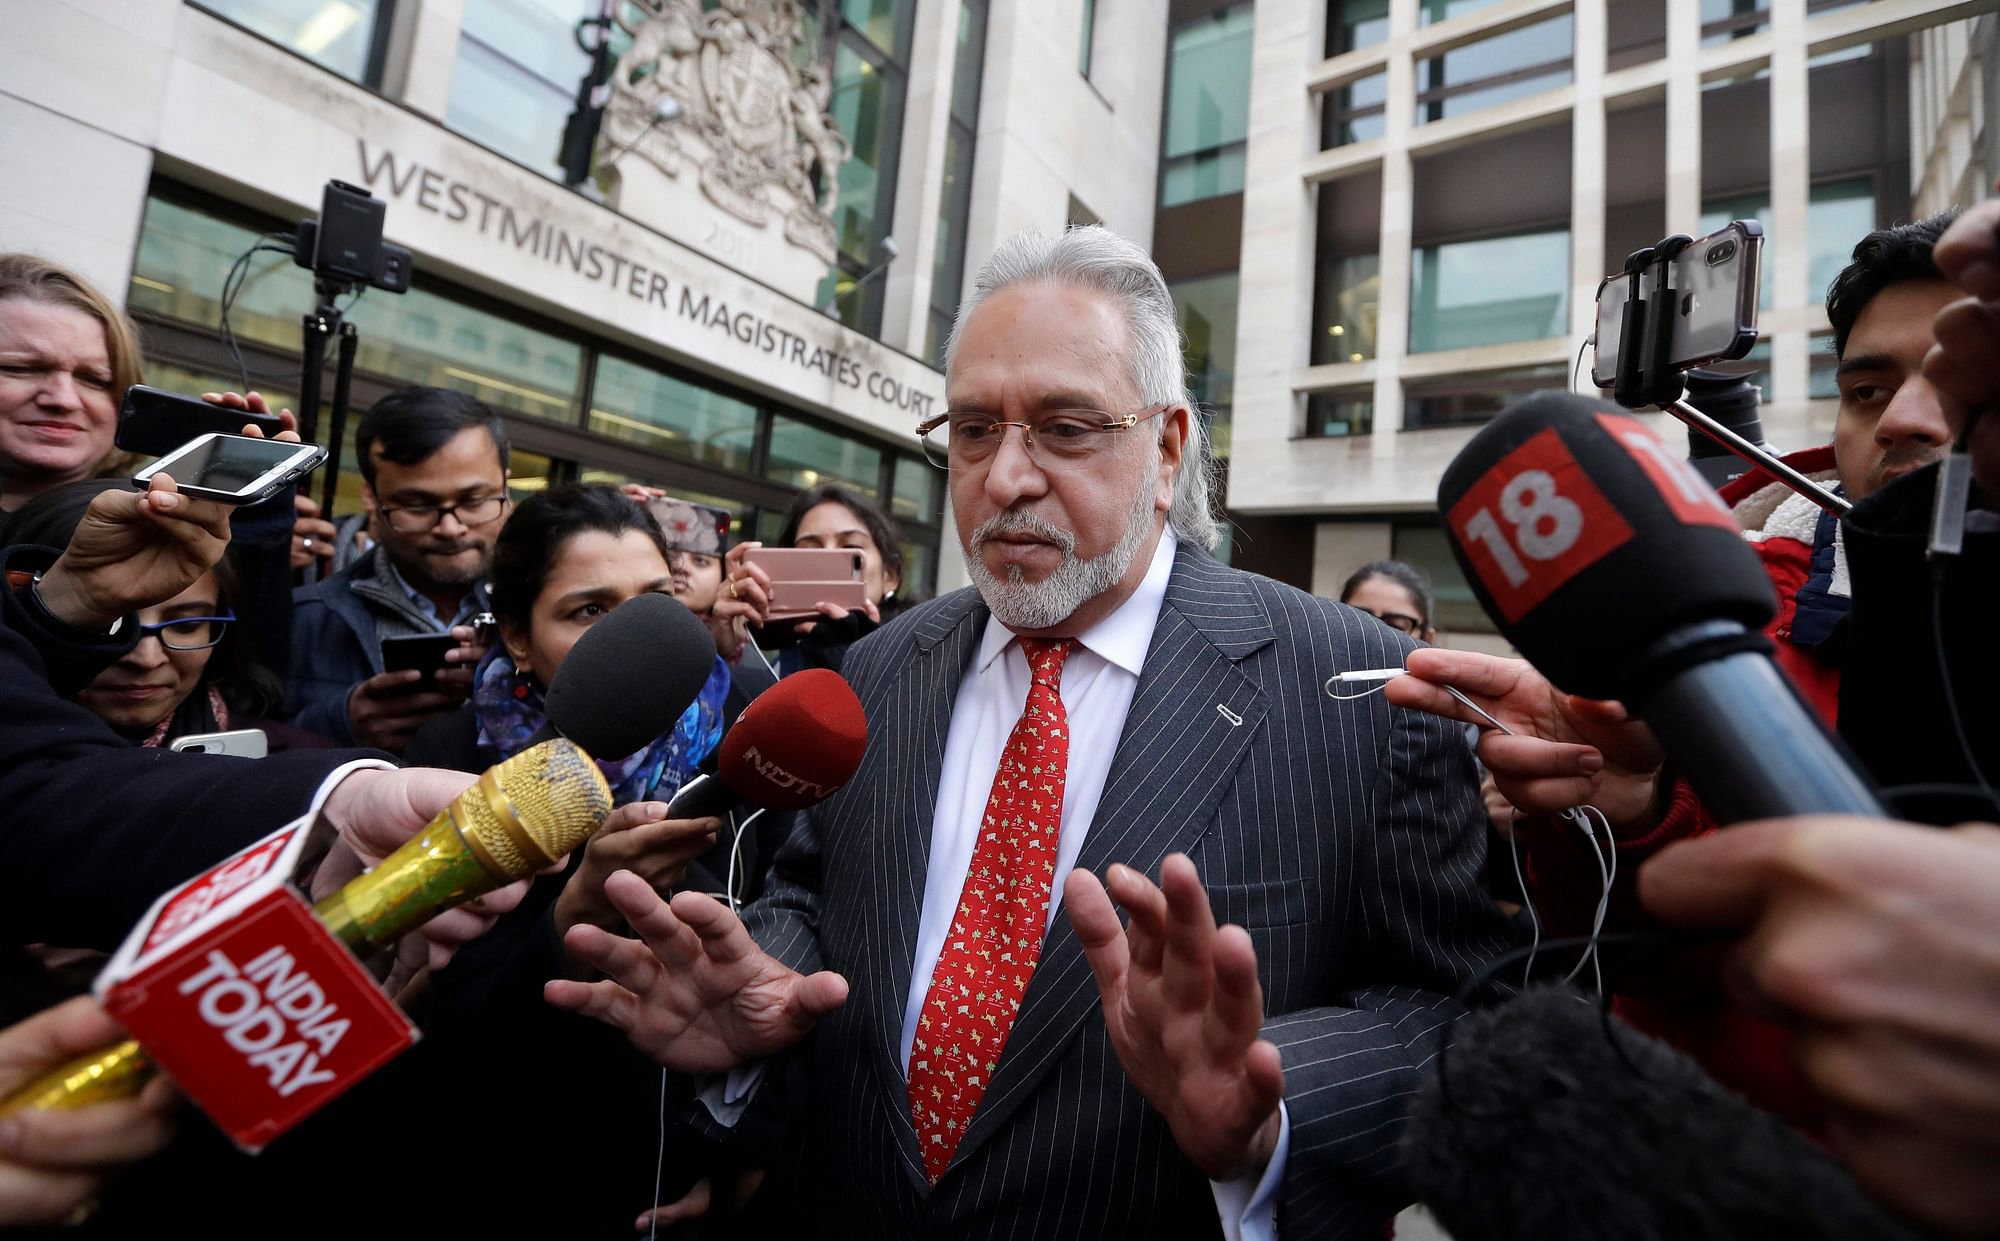 Indian businessman Vijay Mallya is surrounded by journalists as he leaves Westminster Magistrates Court in London, on 10 December 2018.